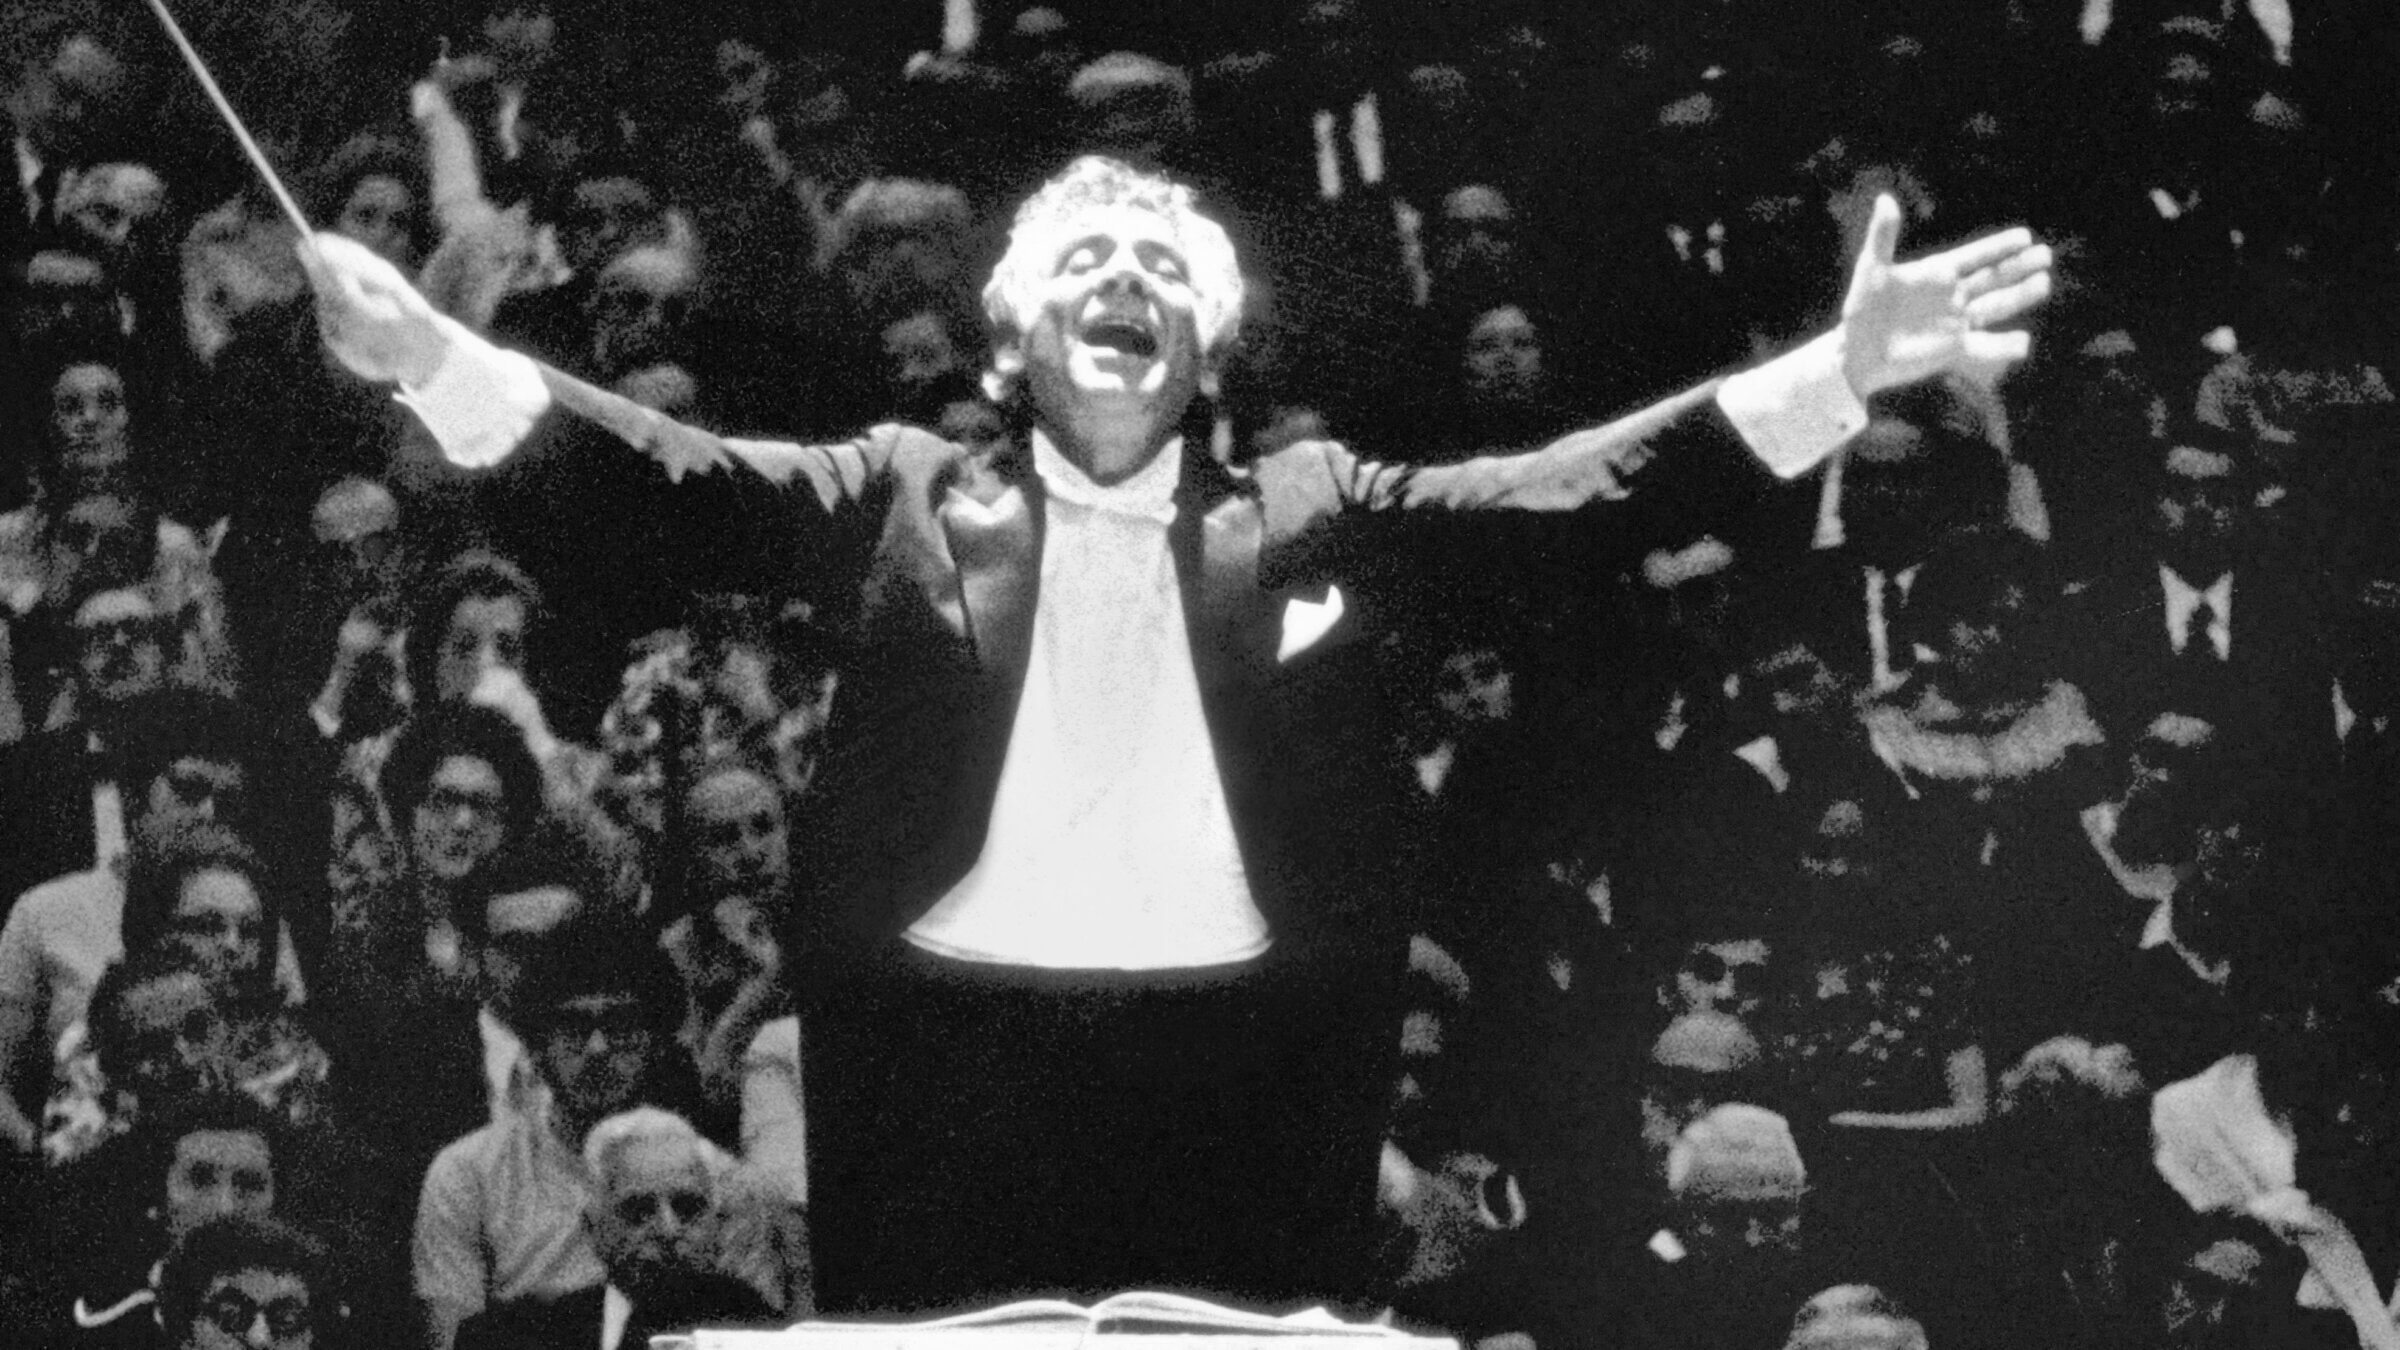 Bernstein, conducting the New York Philharmonic in the 1970s.